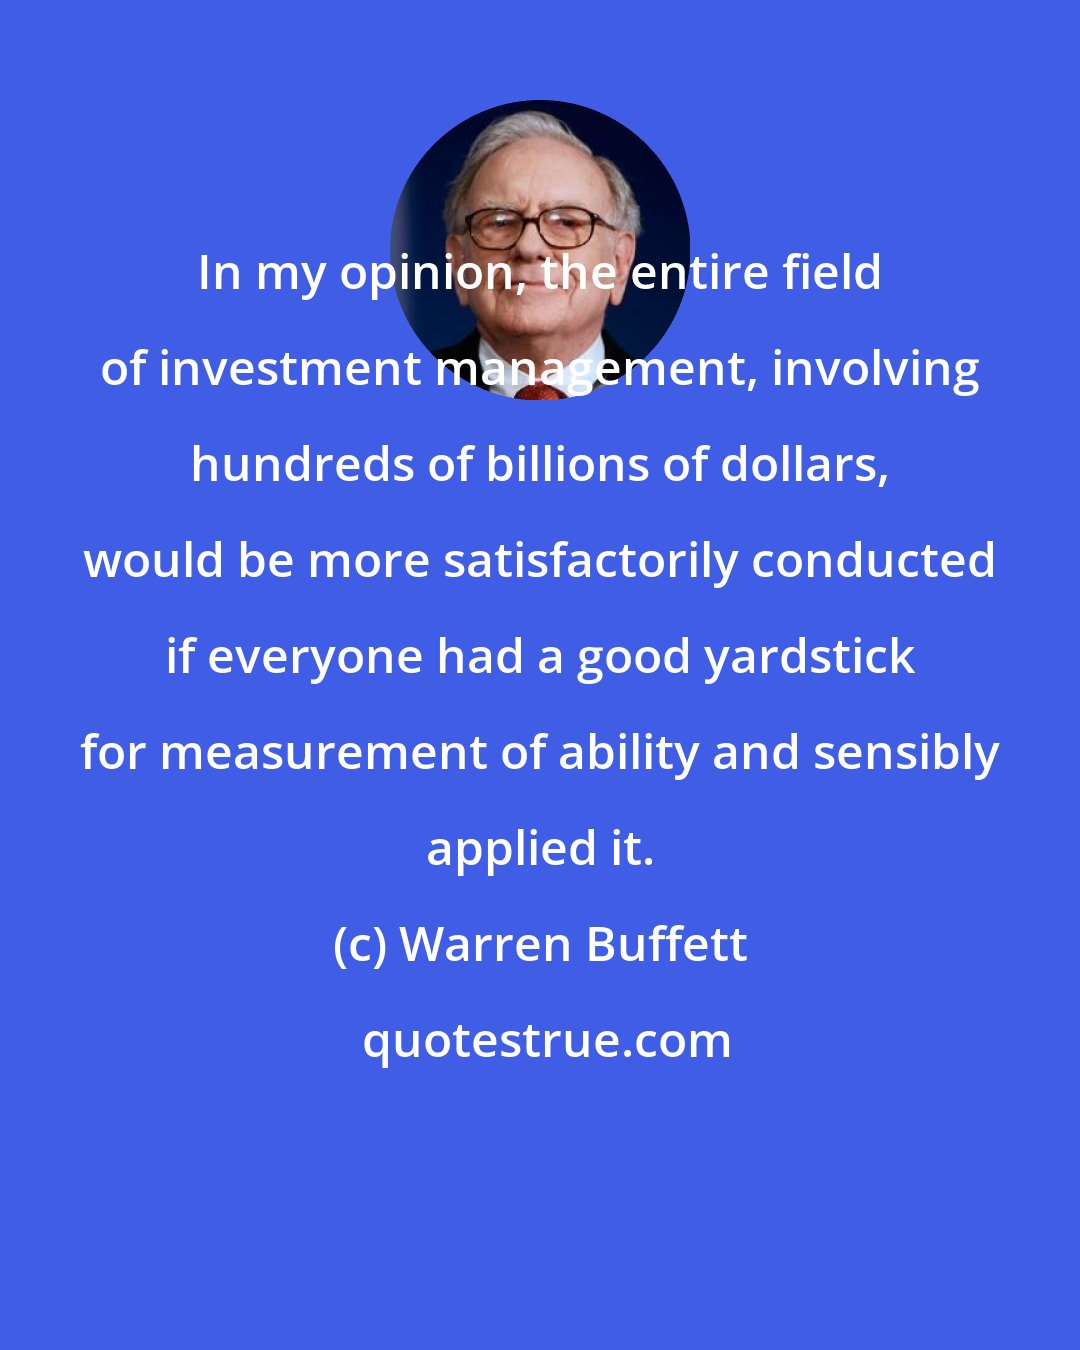 Warren Buffett: In my opinion, the entire field of investment management, involving hundreds of billions of dollars, would be more satisfactorily conducted if everyone had a good yardstick for measurement of ability and sensibly applied it.